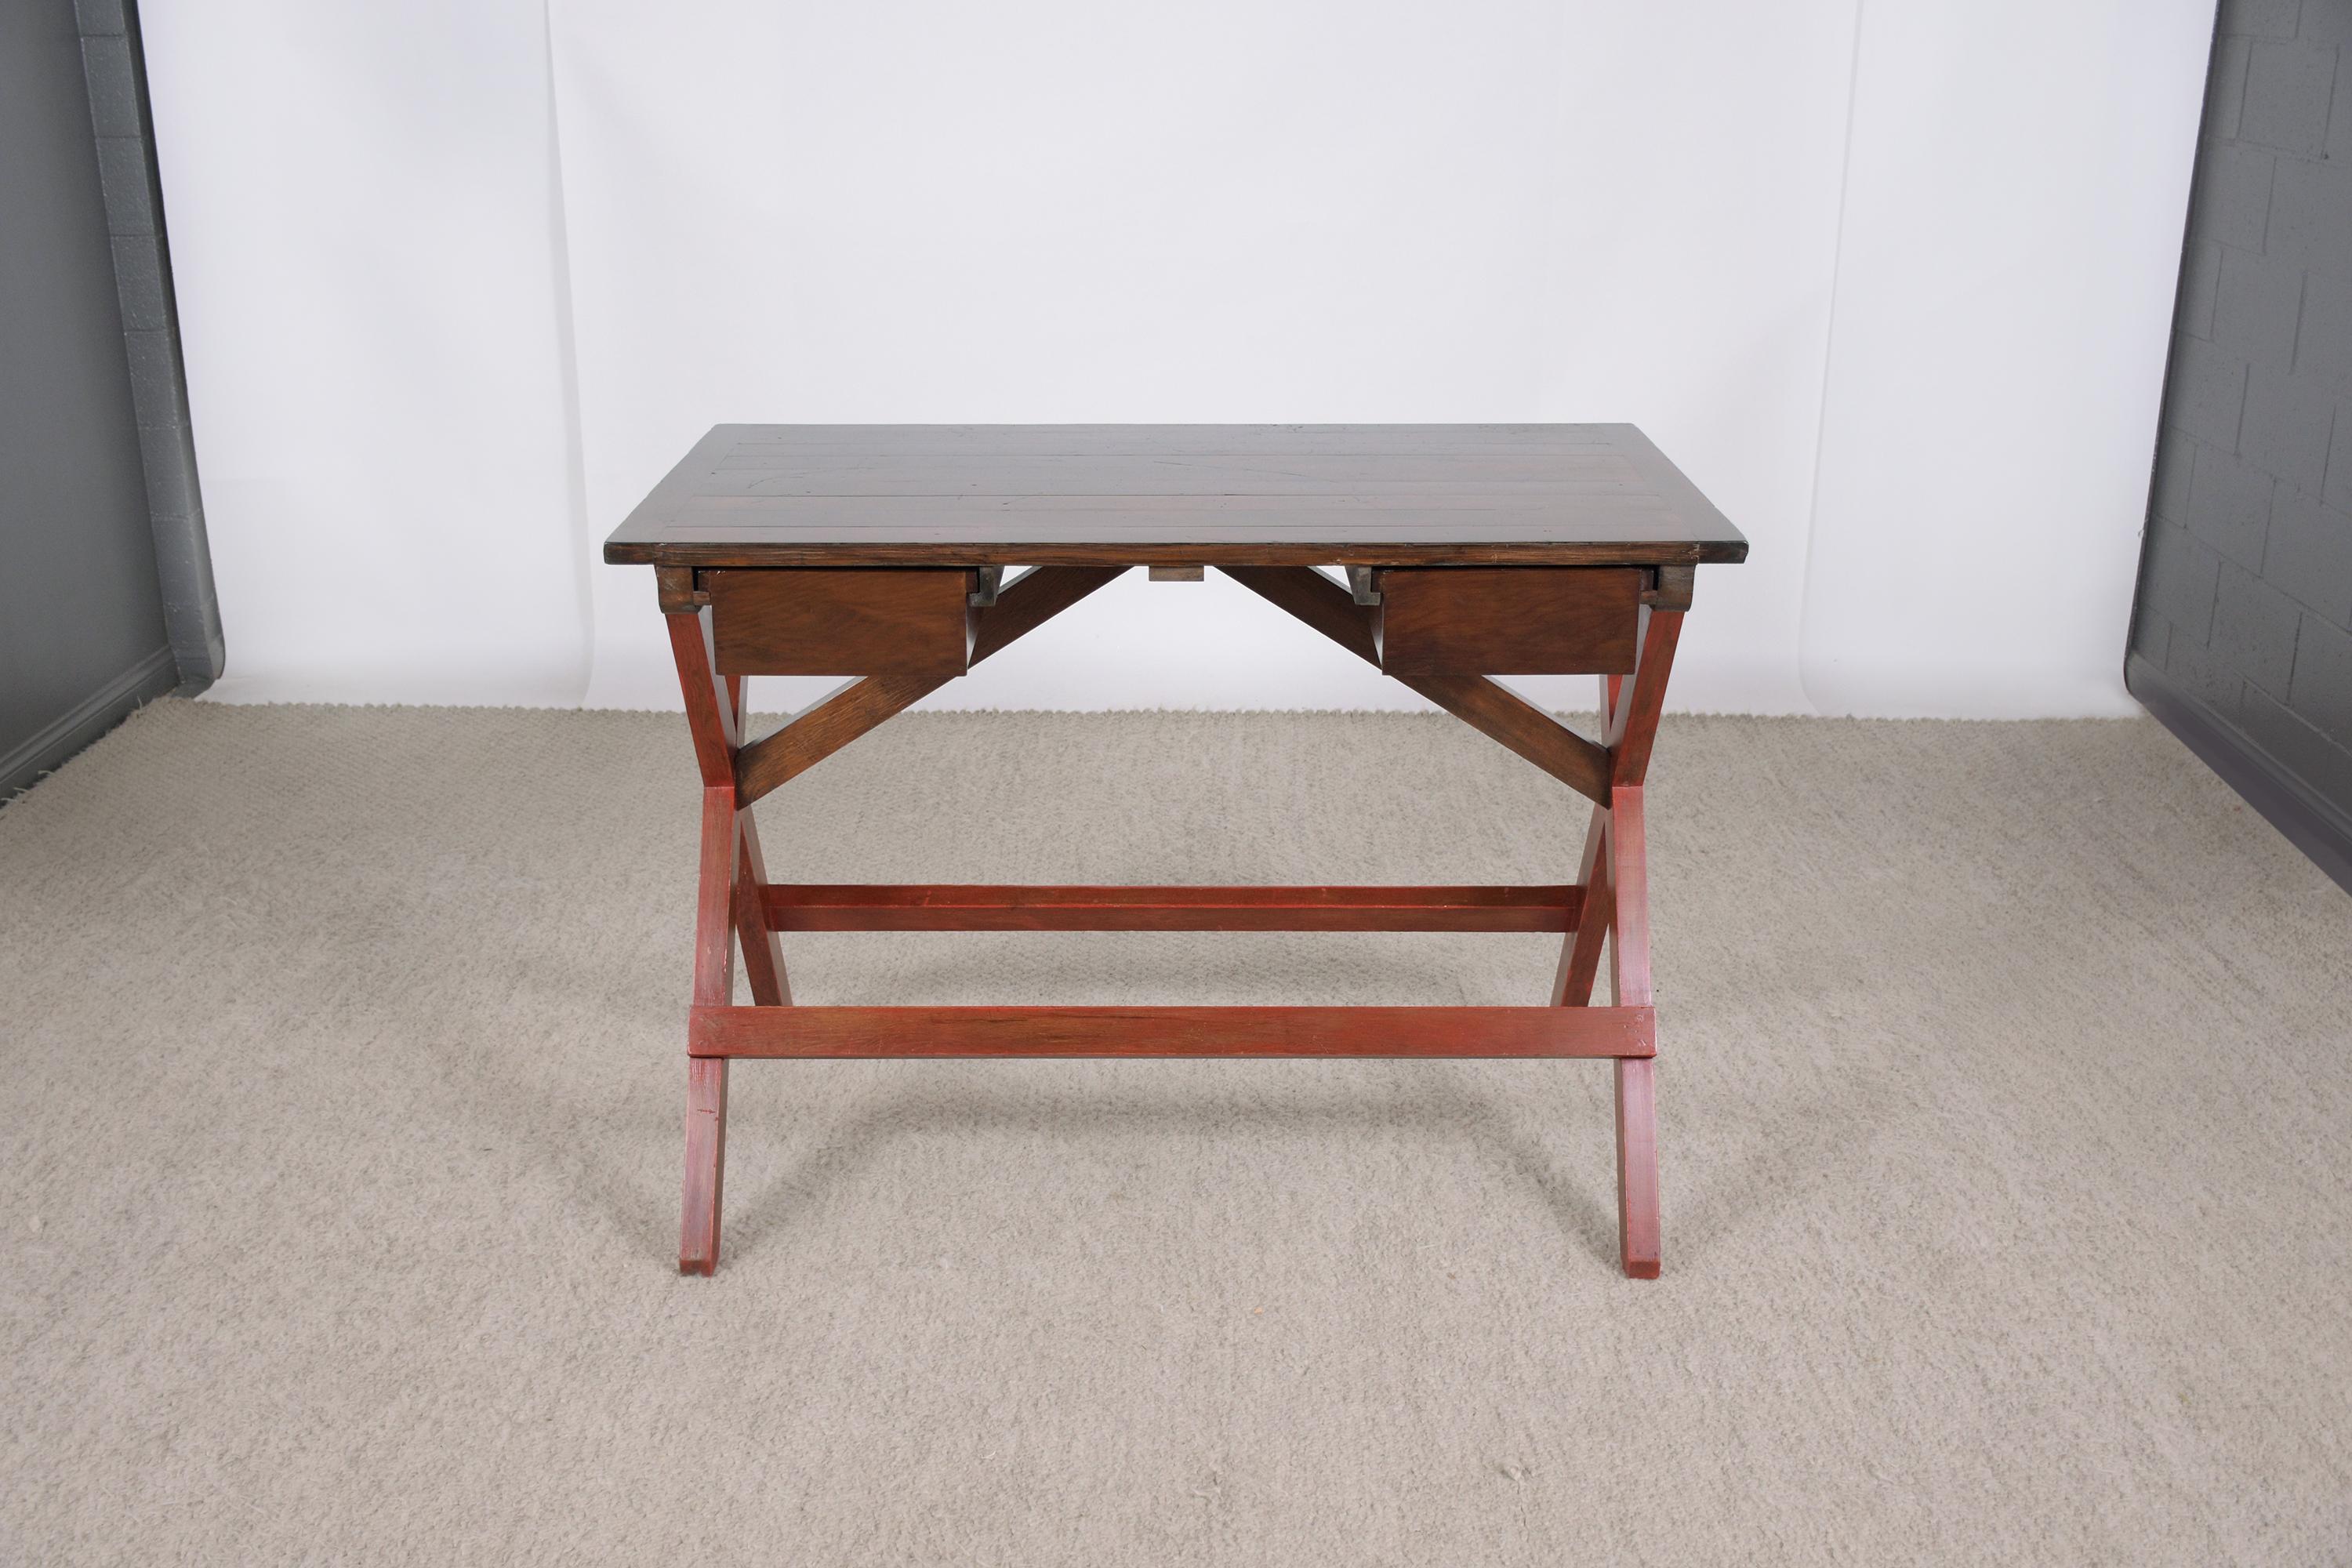 An extraordinary mid-century pine desk in good condition beautiful hand-crafted out of solid pitch pine wood newly restored by our team of expert craftsmen. This 1950s desk features a rectangular wood slab top with wear & use from age, is newly